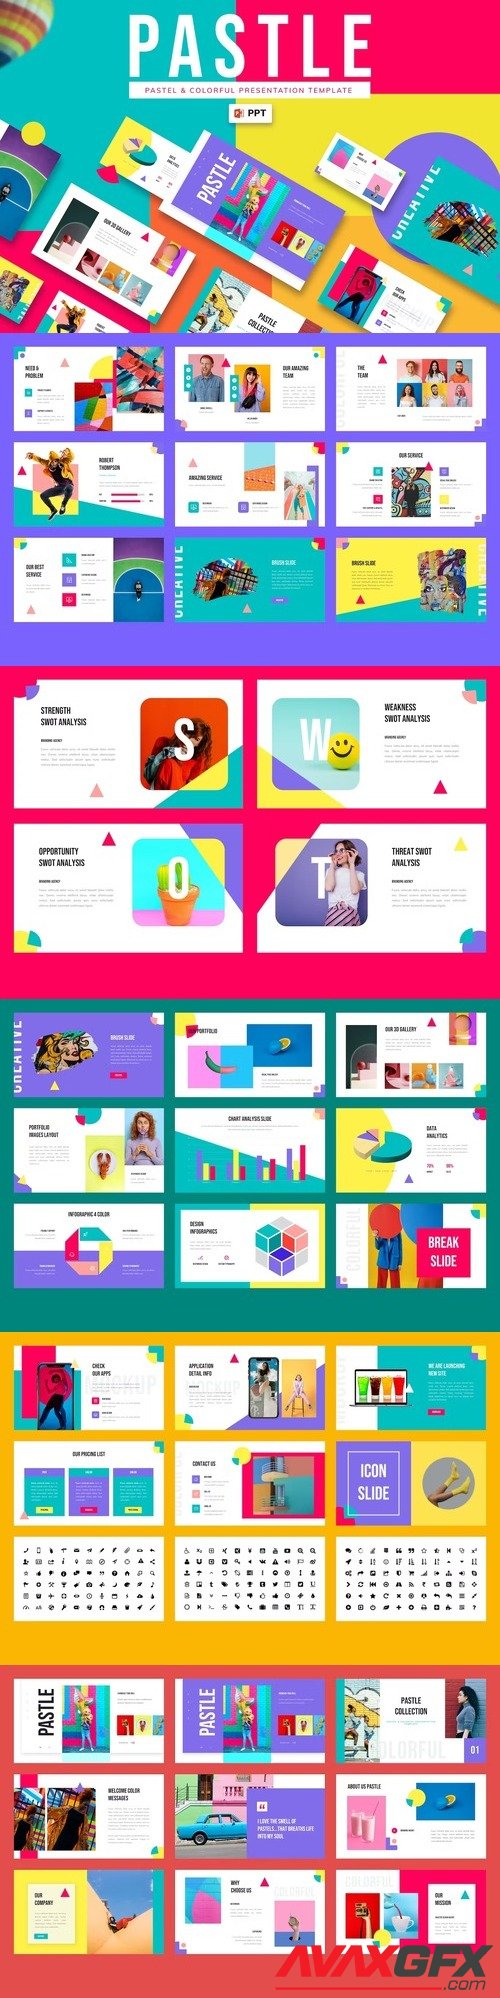 PASTLE - Pastel & Colorful Powerpoint Template [PPTX]